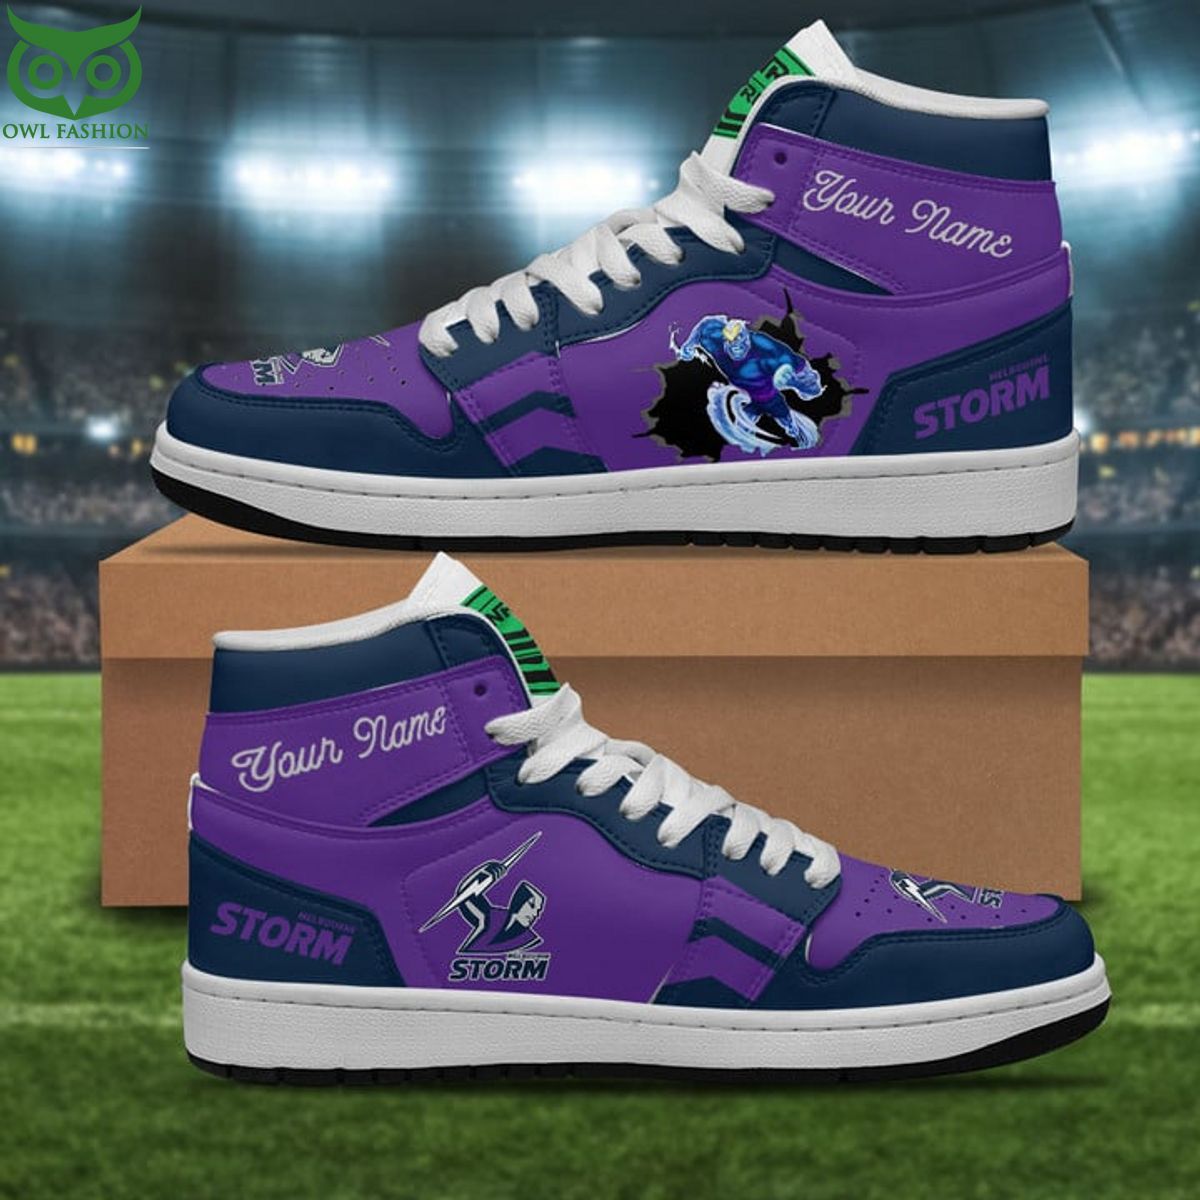 Personalized NRL Melbourne Storm Air Jordan 1 Sneakers Limited